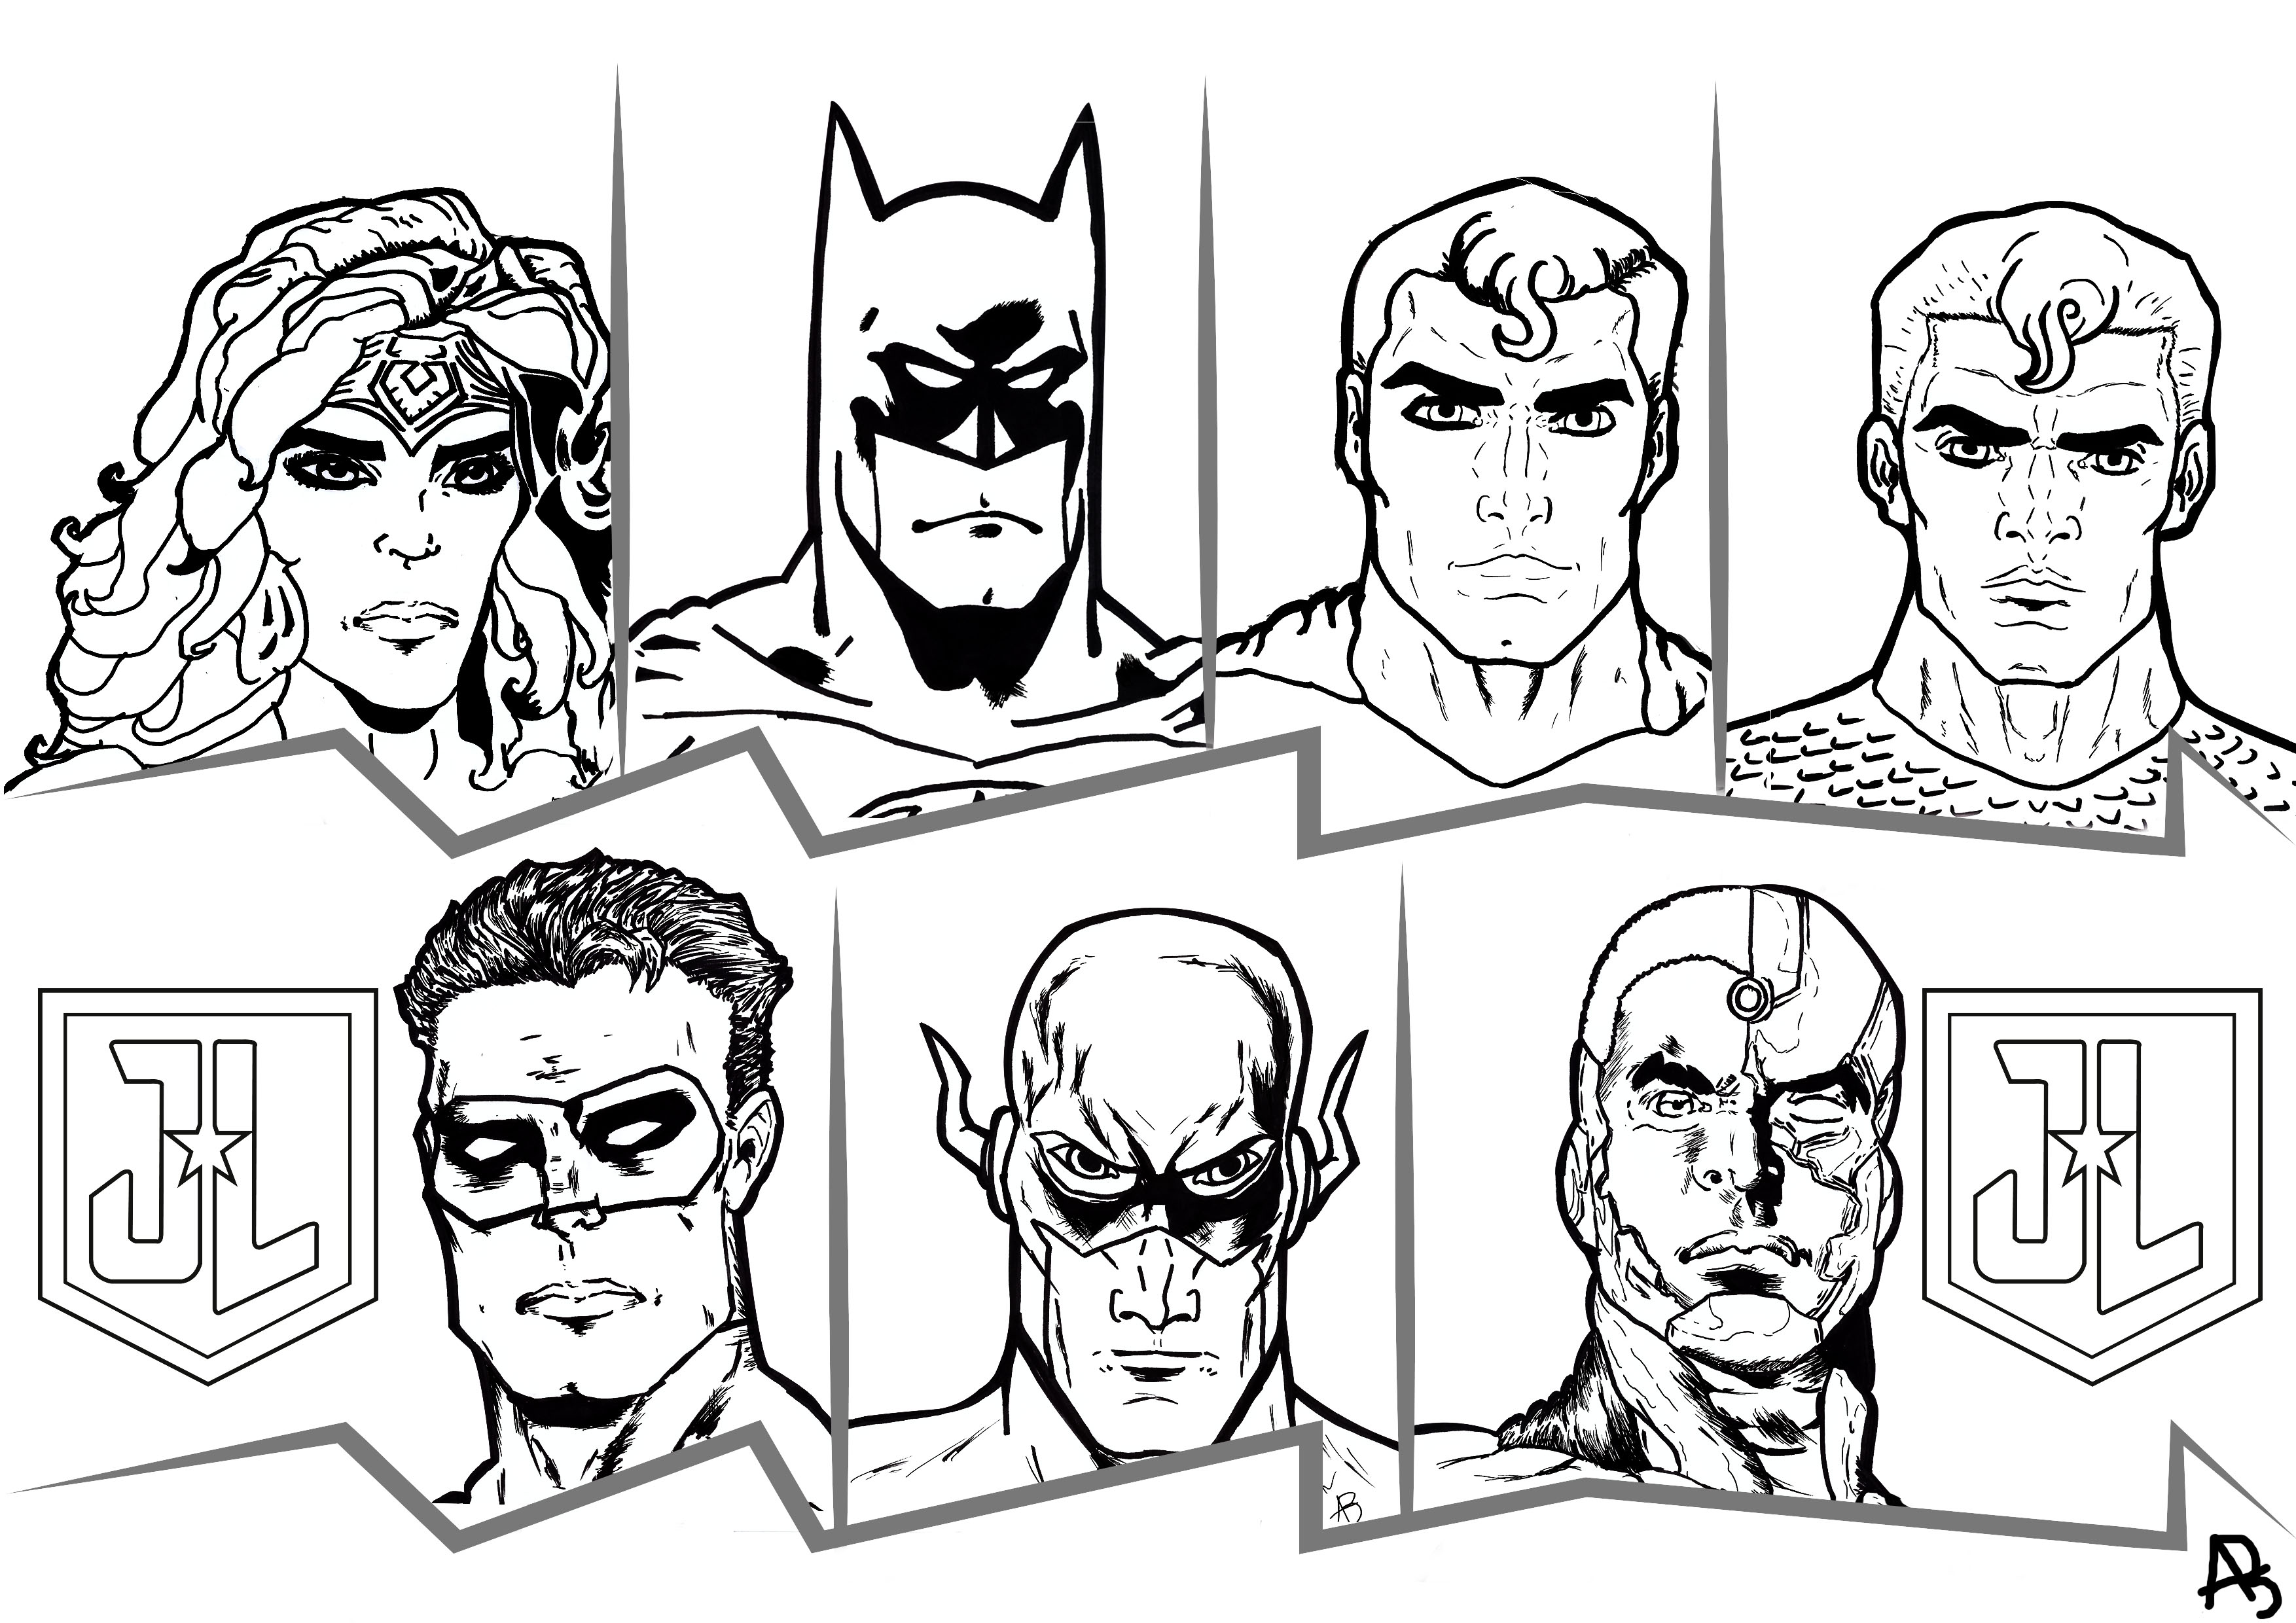 The Justice League movie was released in 2017, for this occasion we created an original coloring page